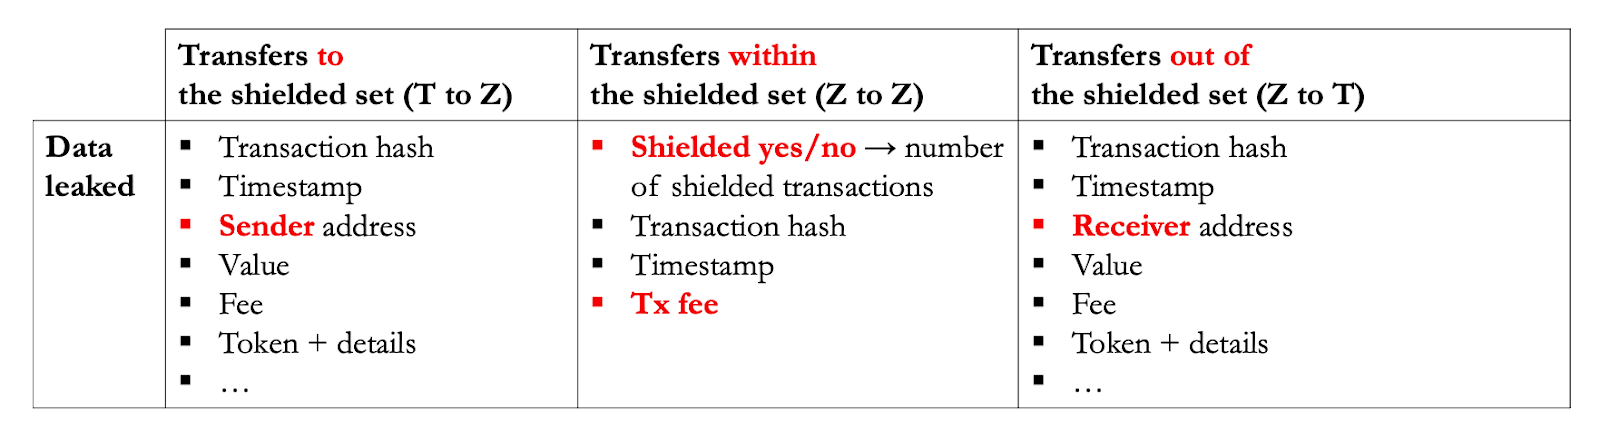 Table 1: Overview of data being leaked between T to Z, Z to Z, and Z to T transactions‌ ‌